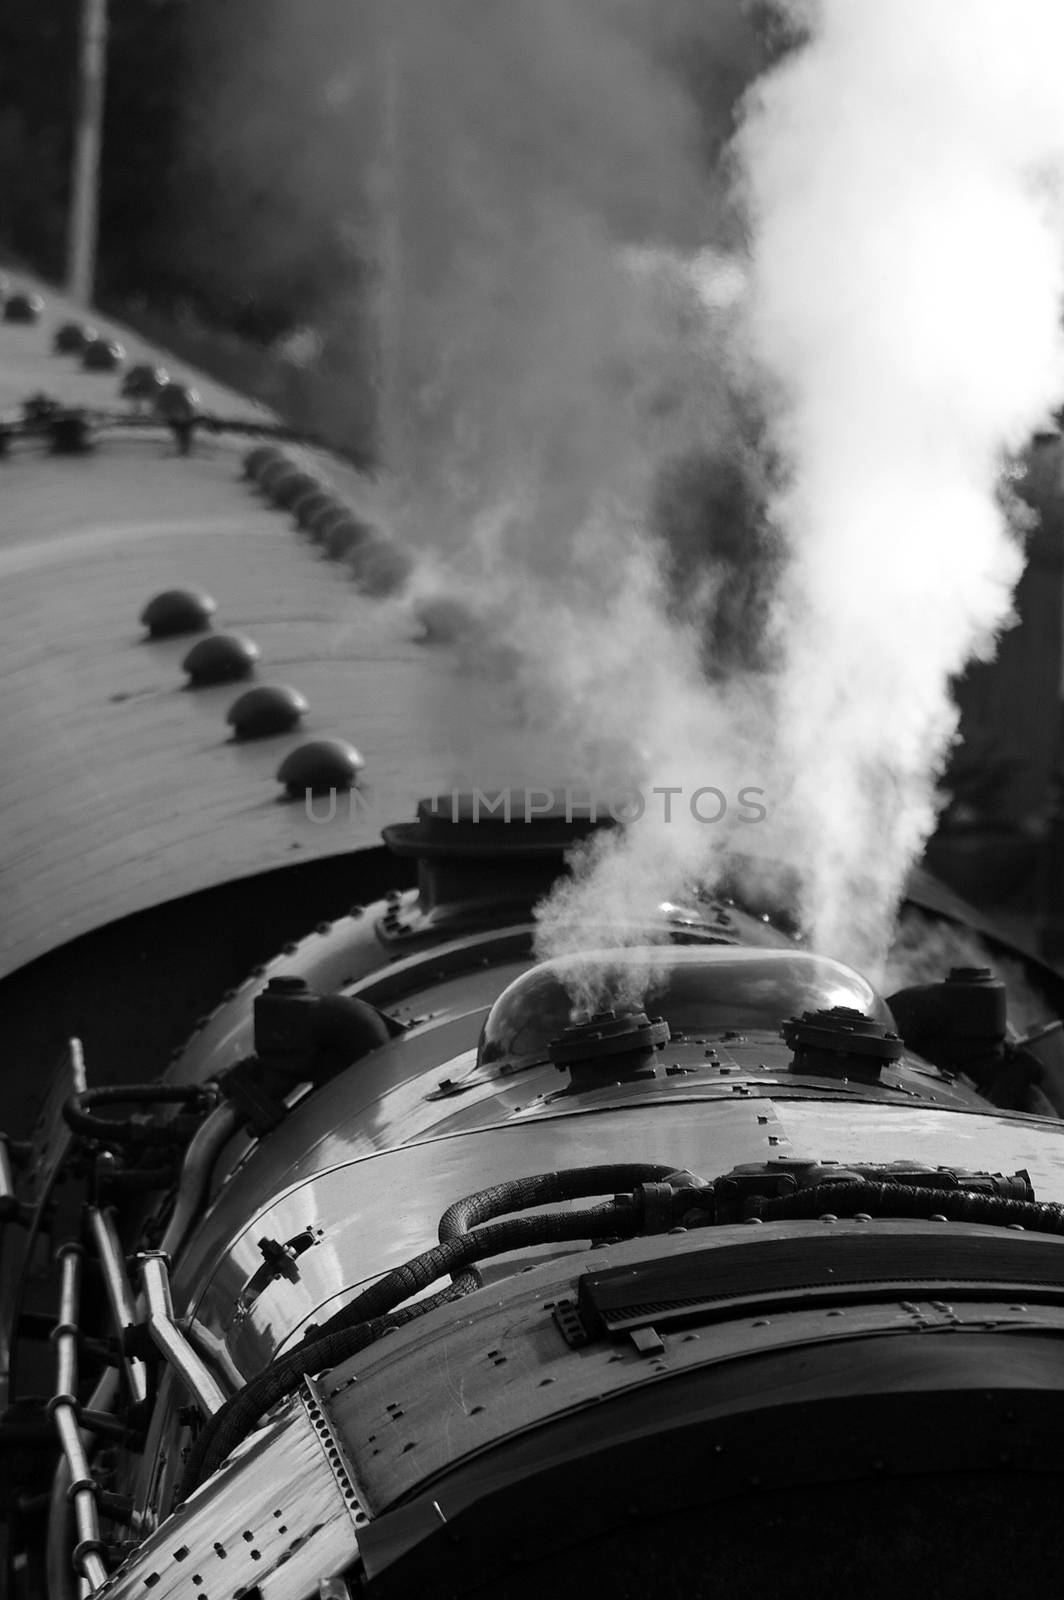 An old steam locomotive train with steam being released at a station